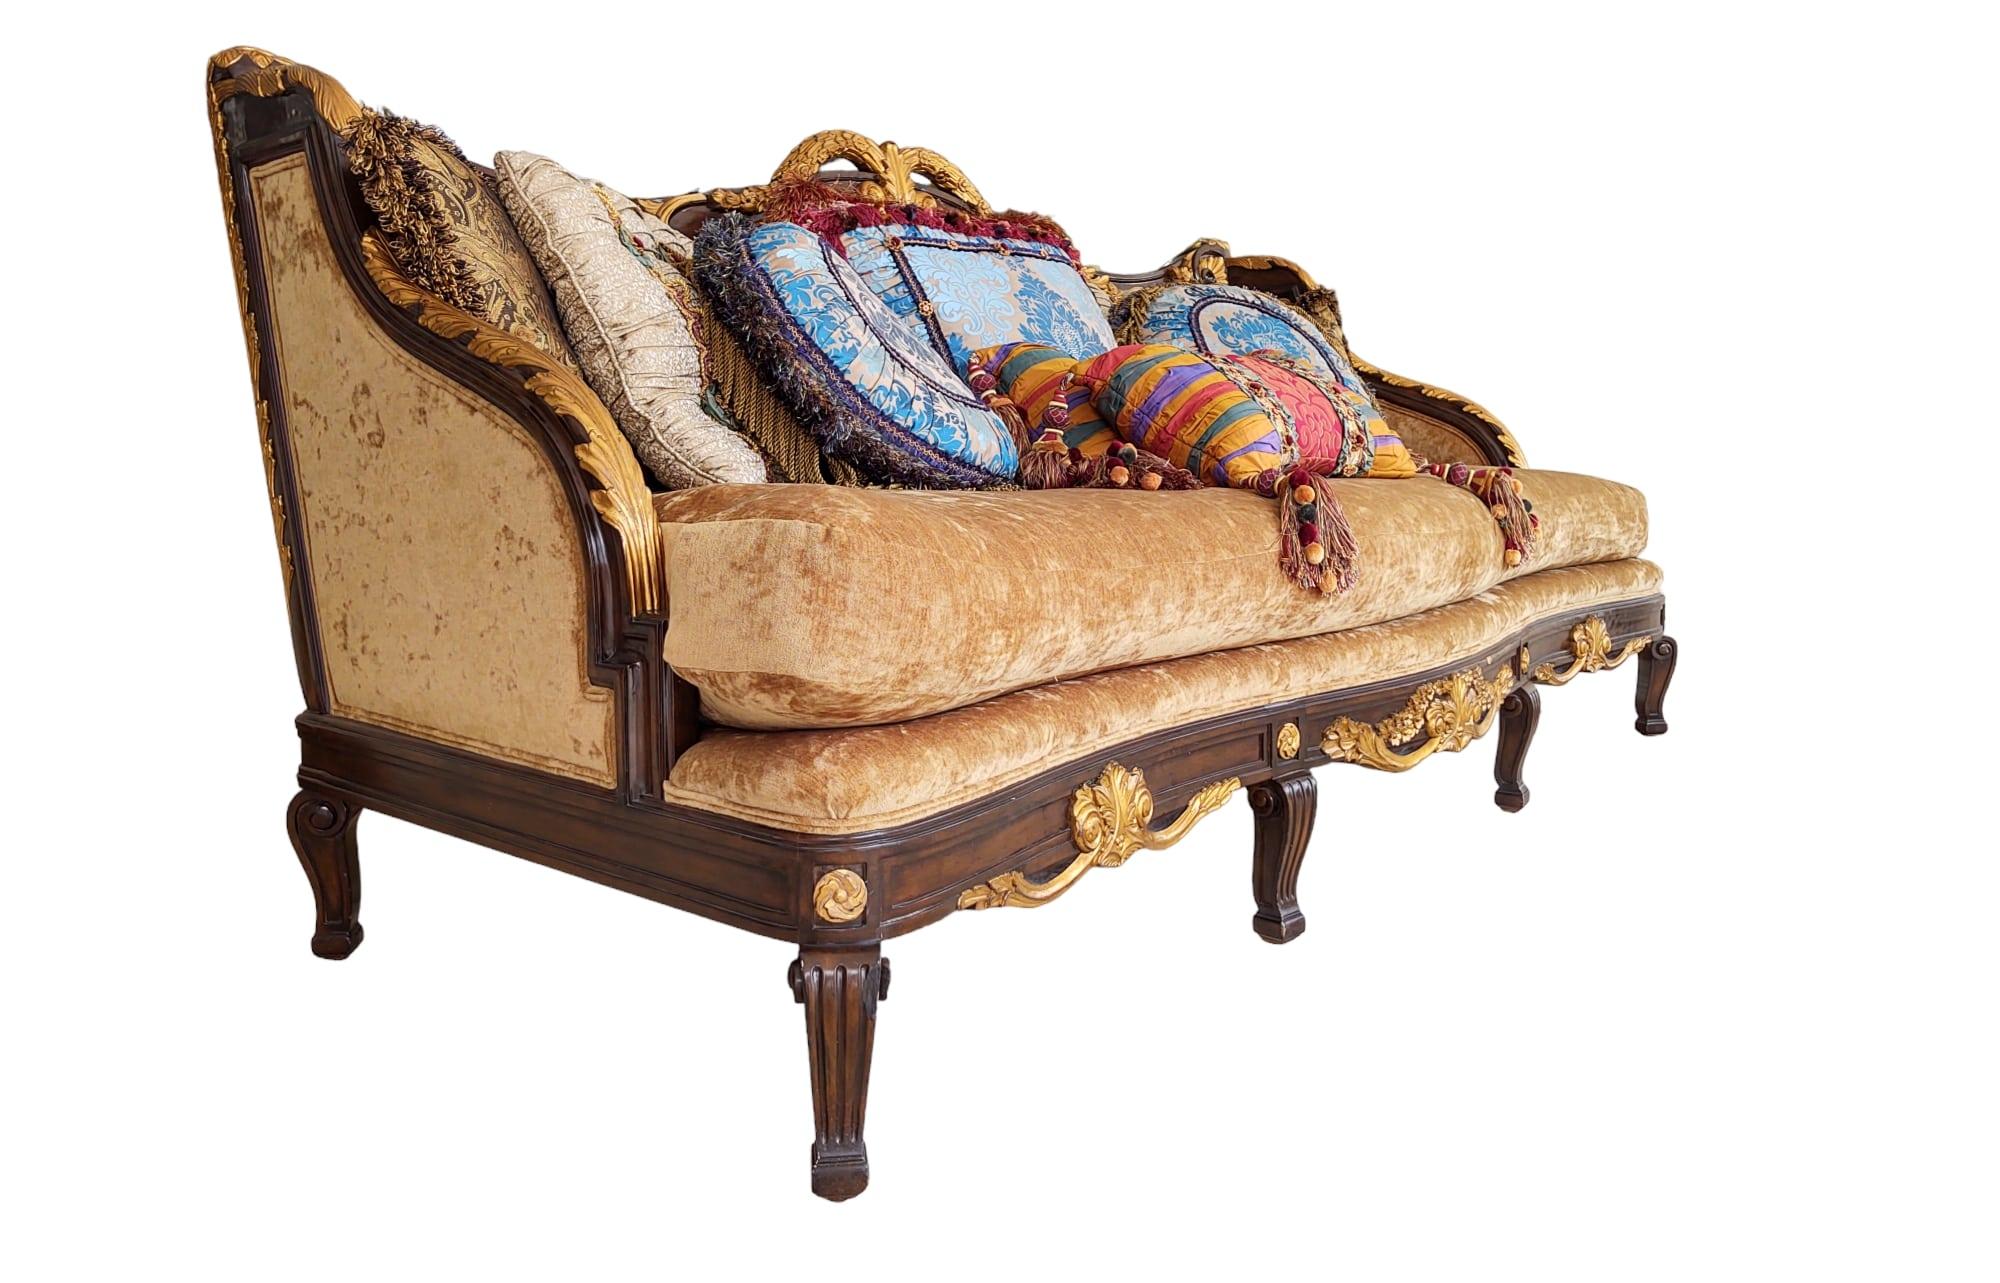 Large-scale Italianate sofa by Marge Carson, upholstered in velvet. Custom-made pillows are included, as shown, except for the front center pillow, which is not included.
Since its inception in 1947, Marge Carson has been making furniture for the